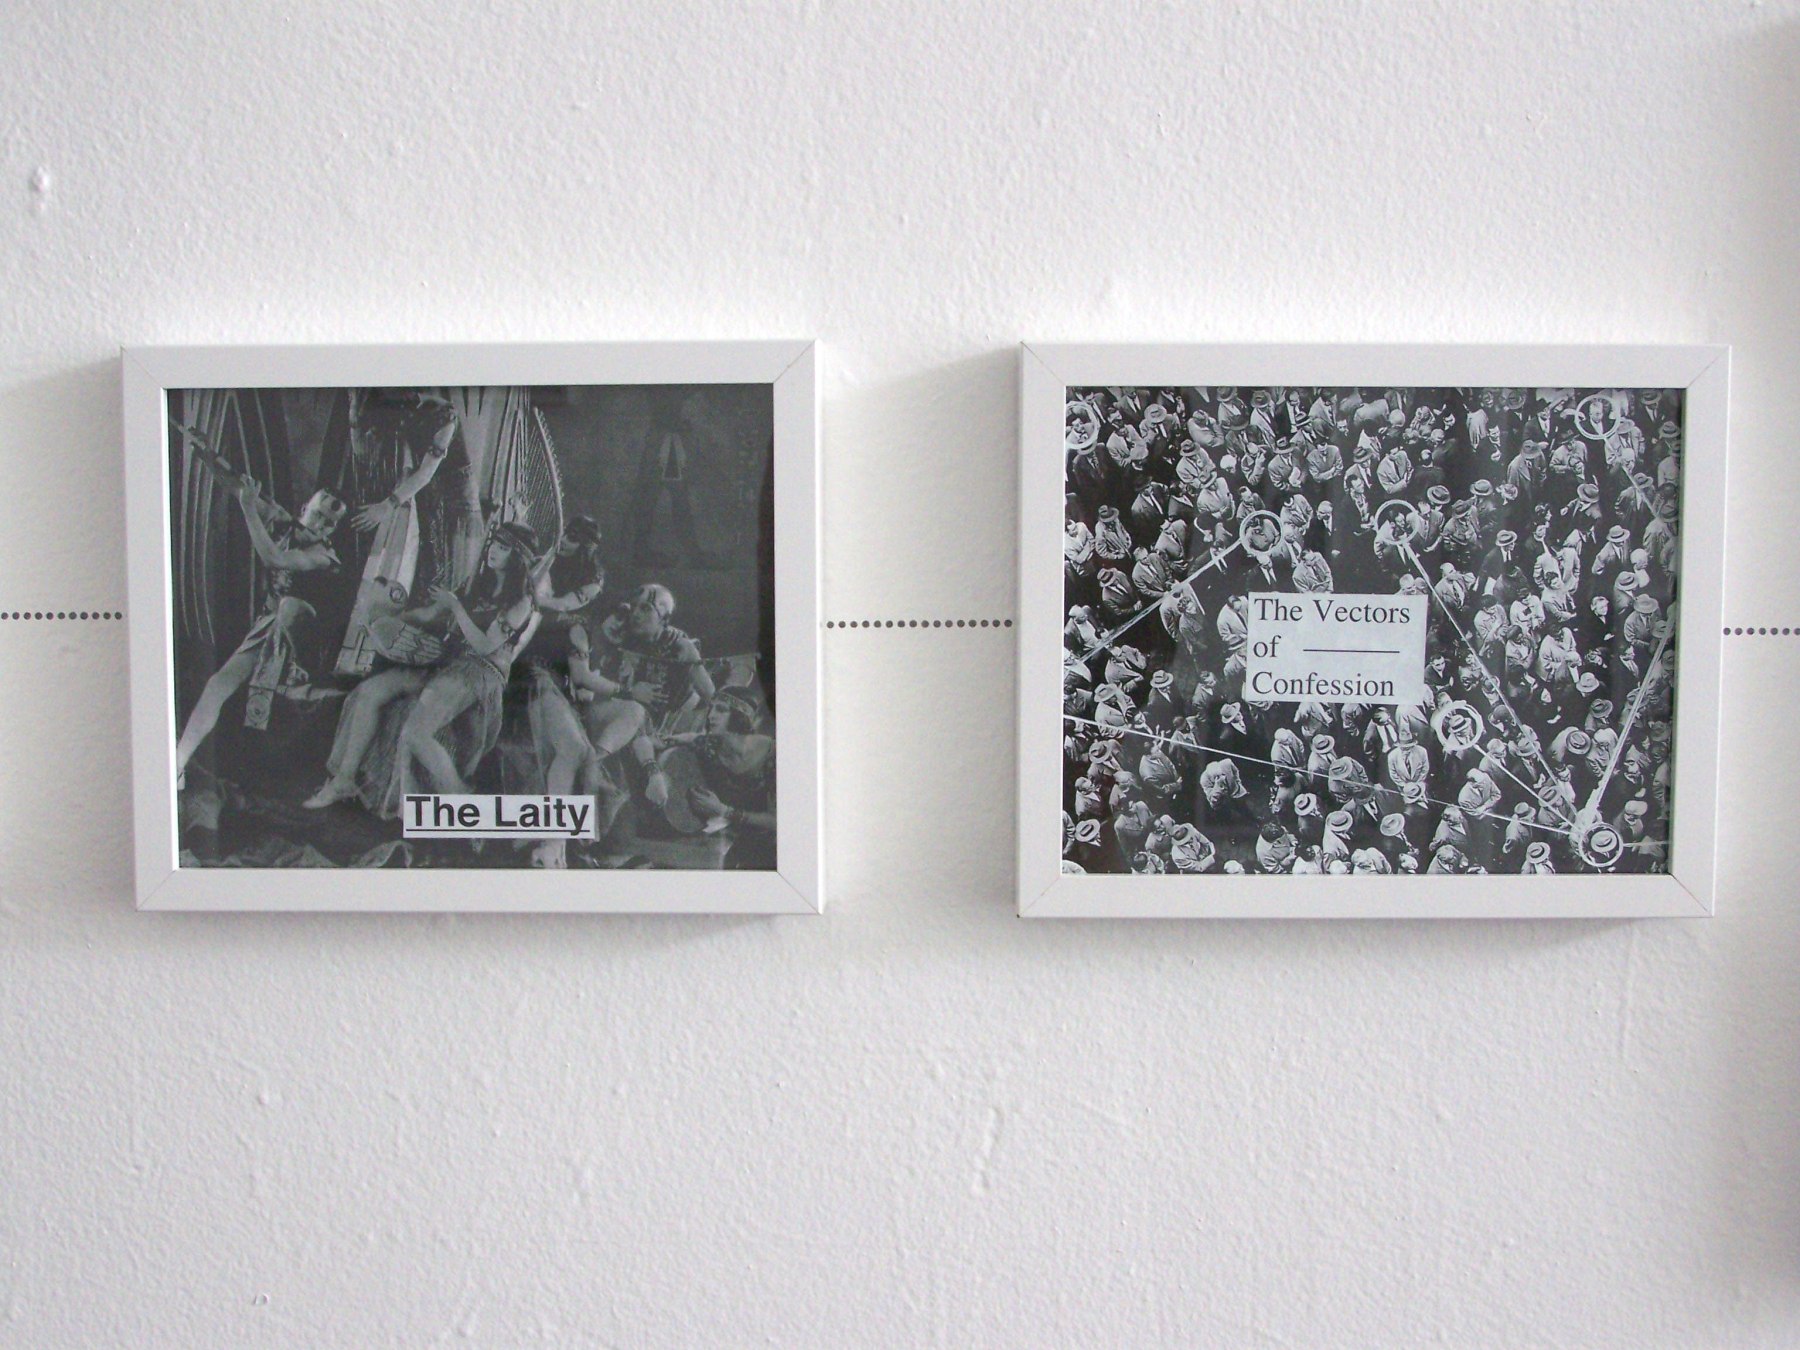 Two framed xerox collages, reading 'The Laity' and 'The Vectors of Confession'